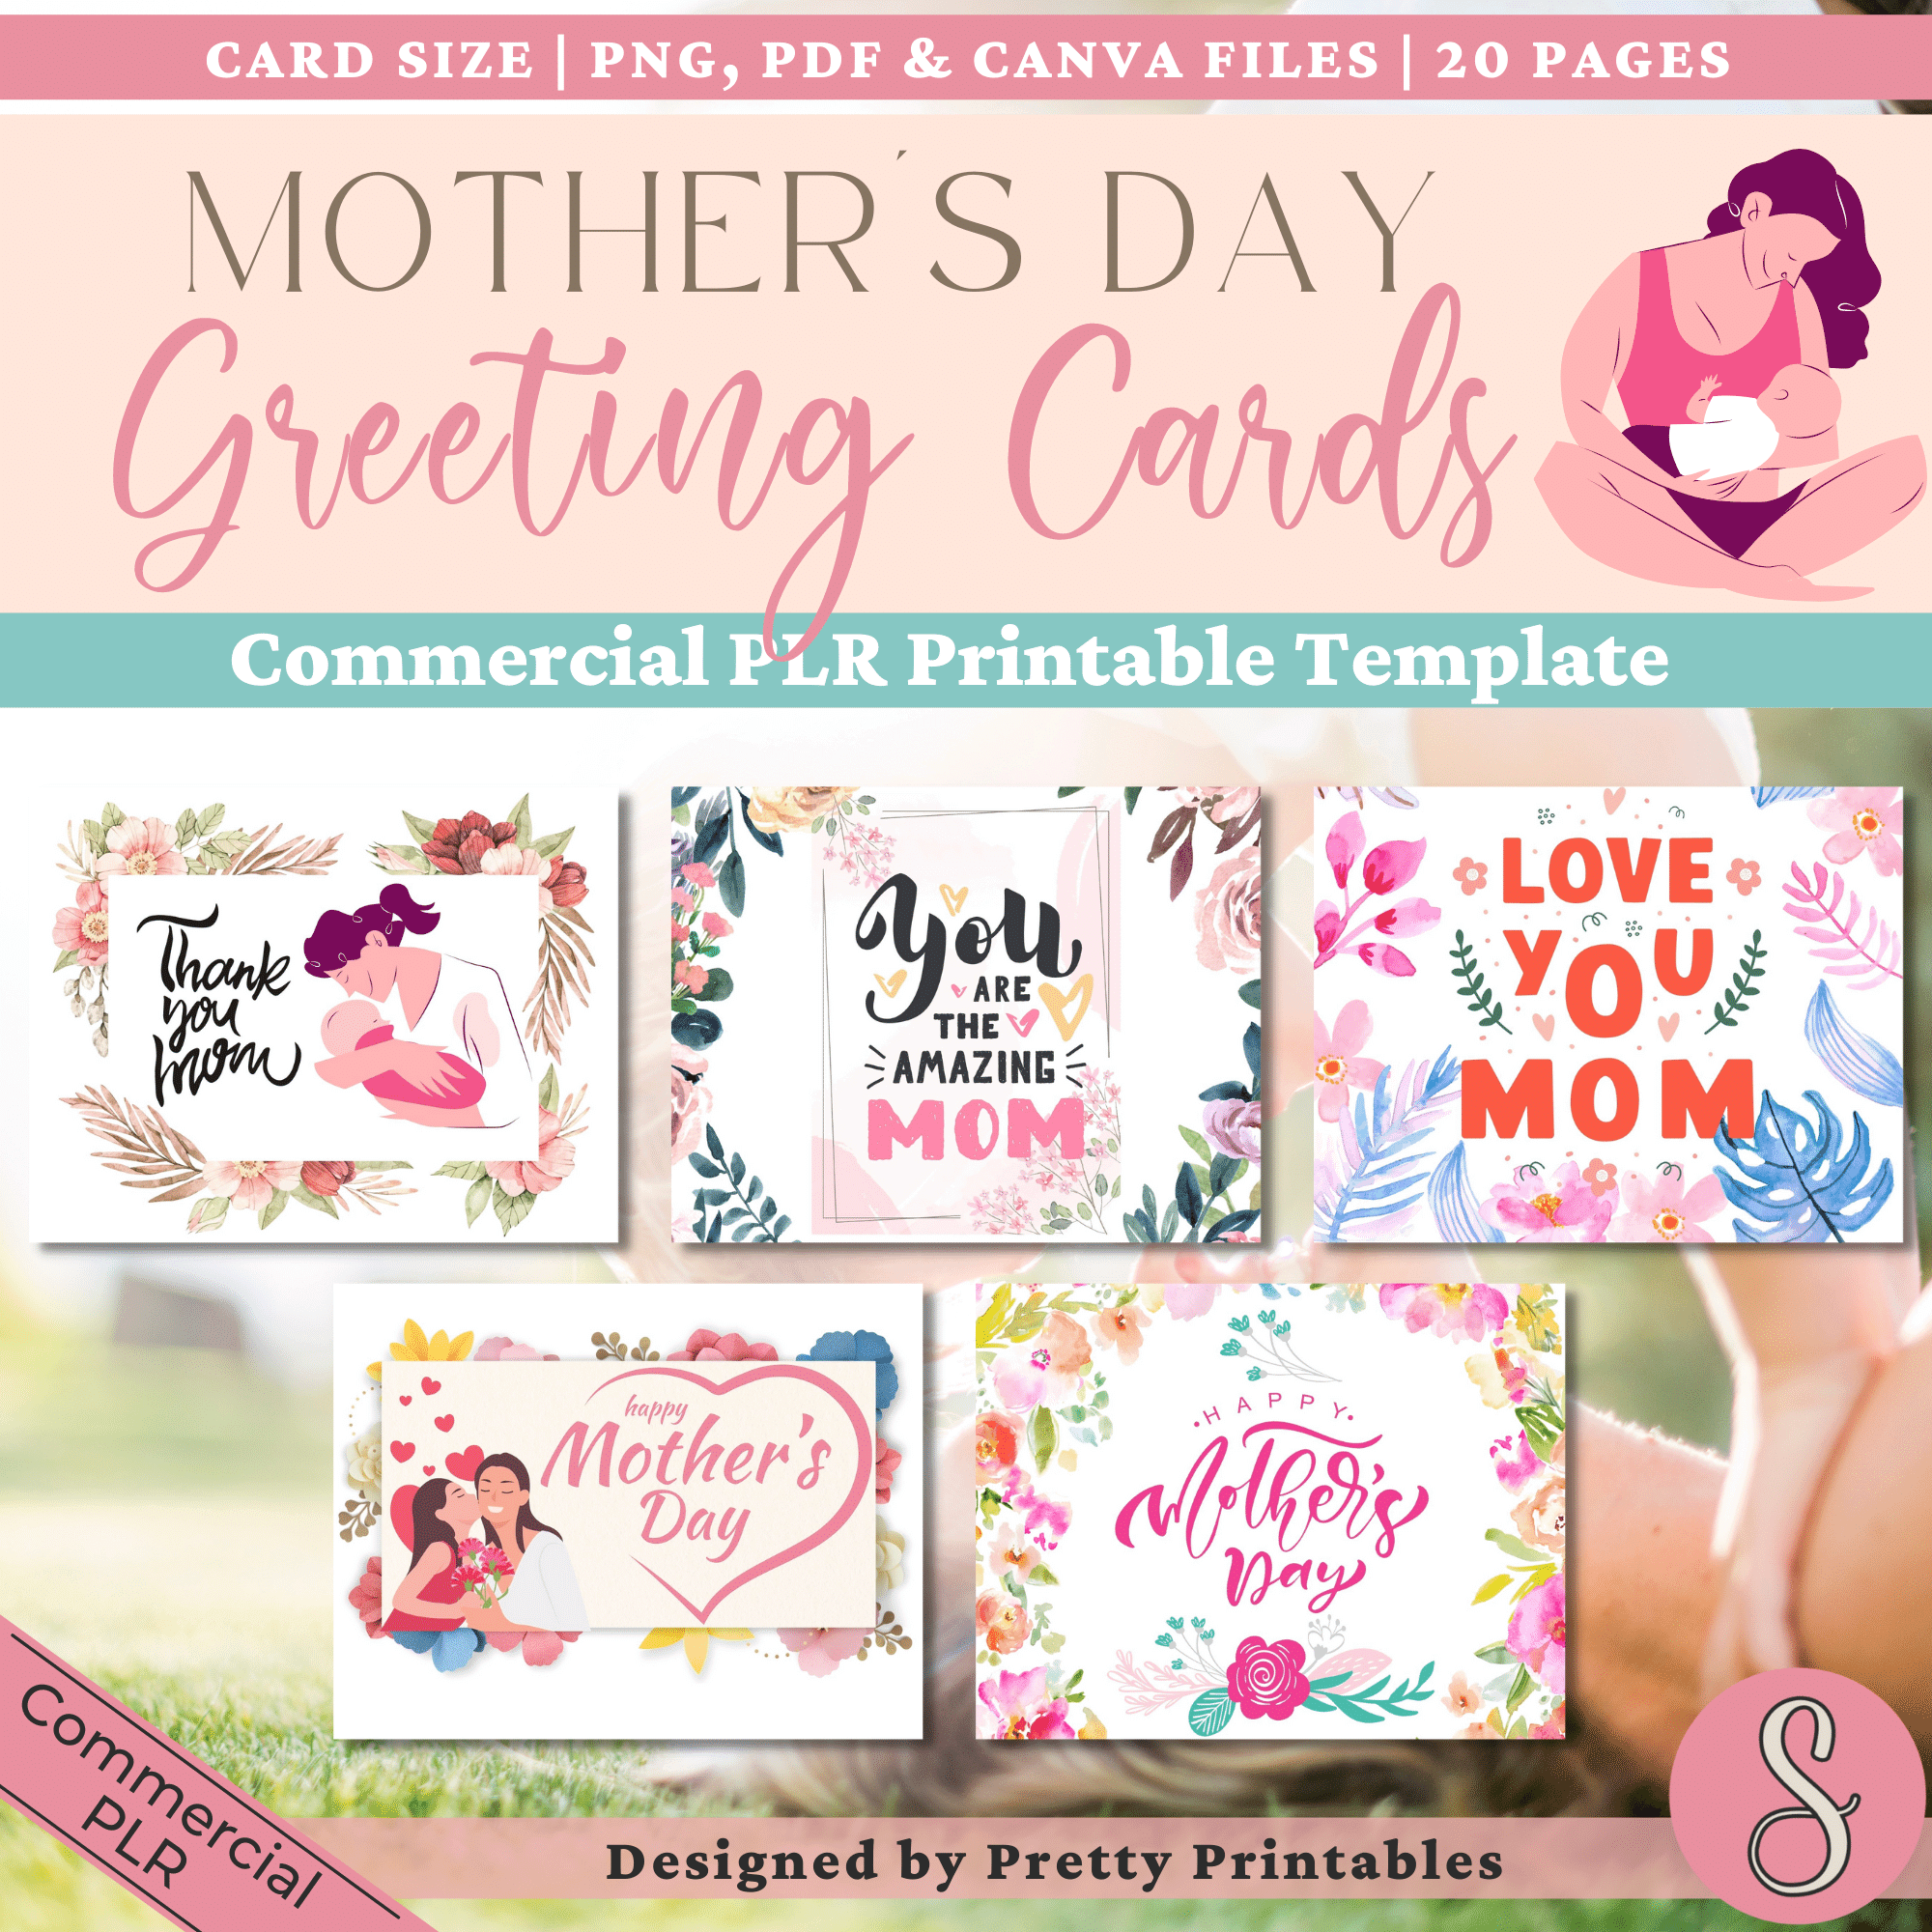 Mother's Day Greeting Cards Commercial PLR Printable Template